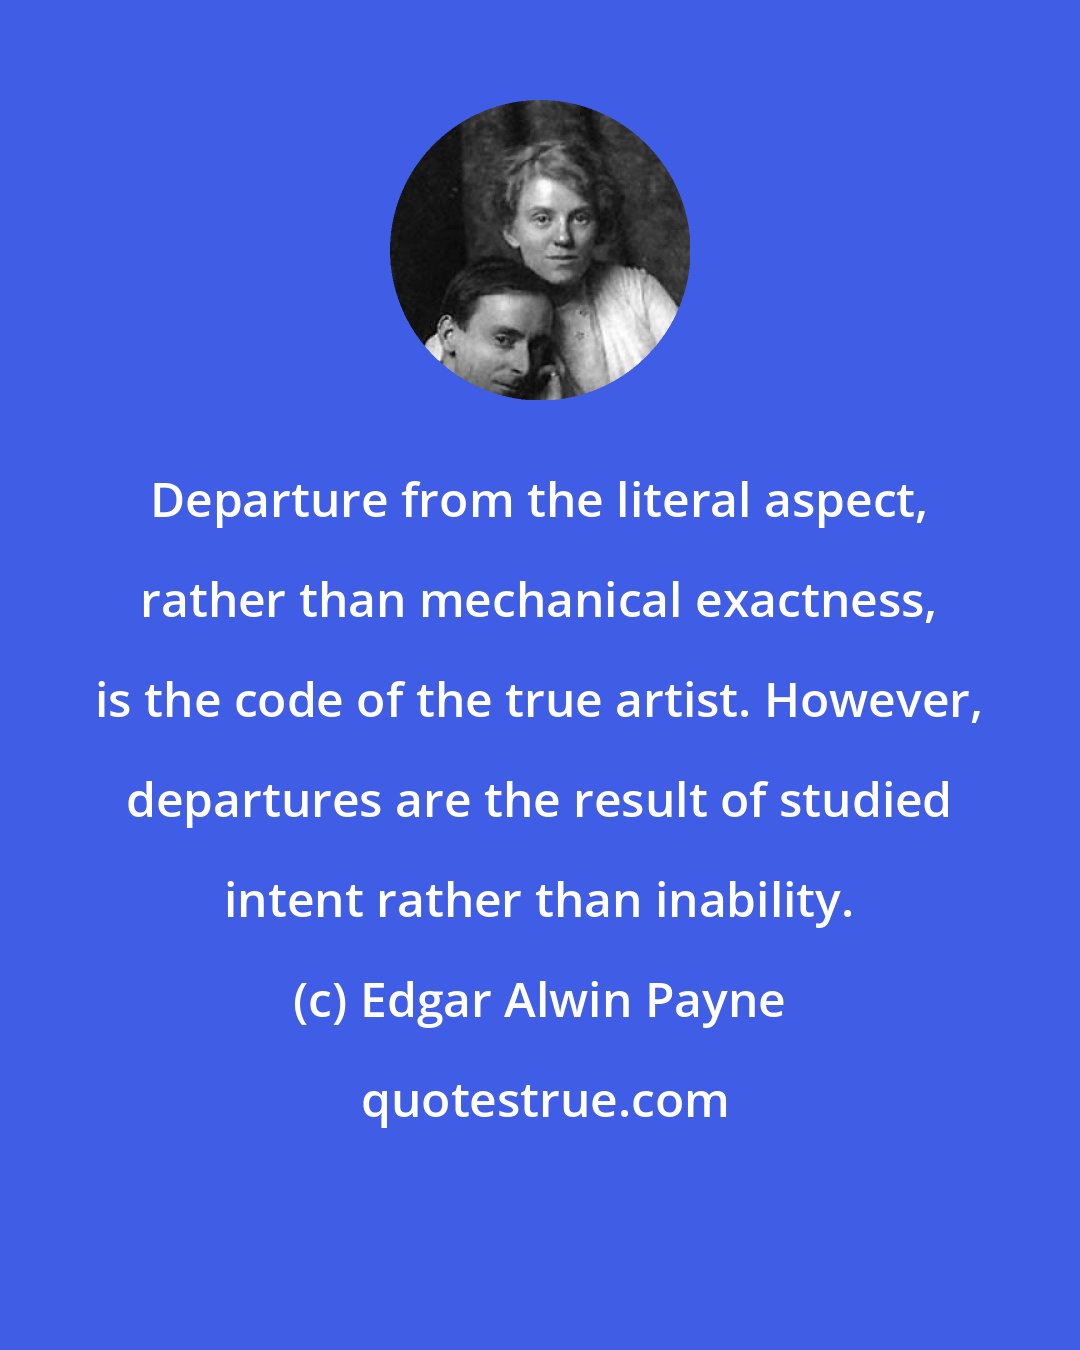 Edgar Alwin Payne: Departure from the literal aspect, rather than mechanical exactness, is the code of the true artist. However, departures are the result of studied intent rather than inability.